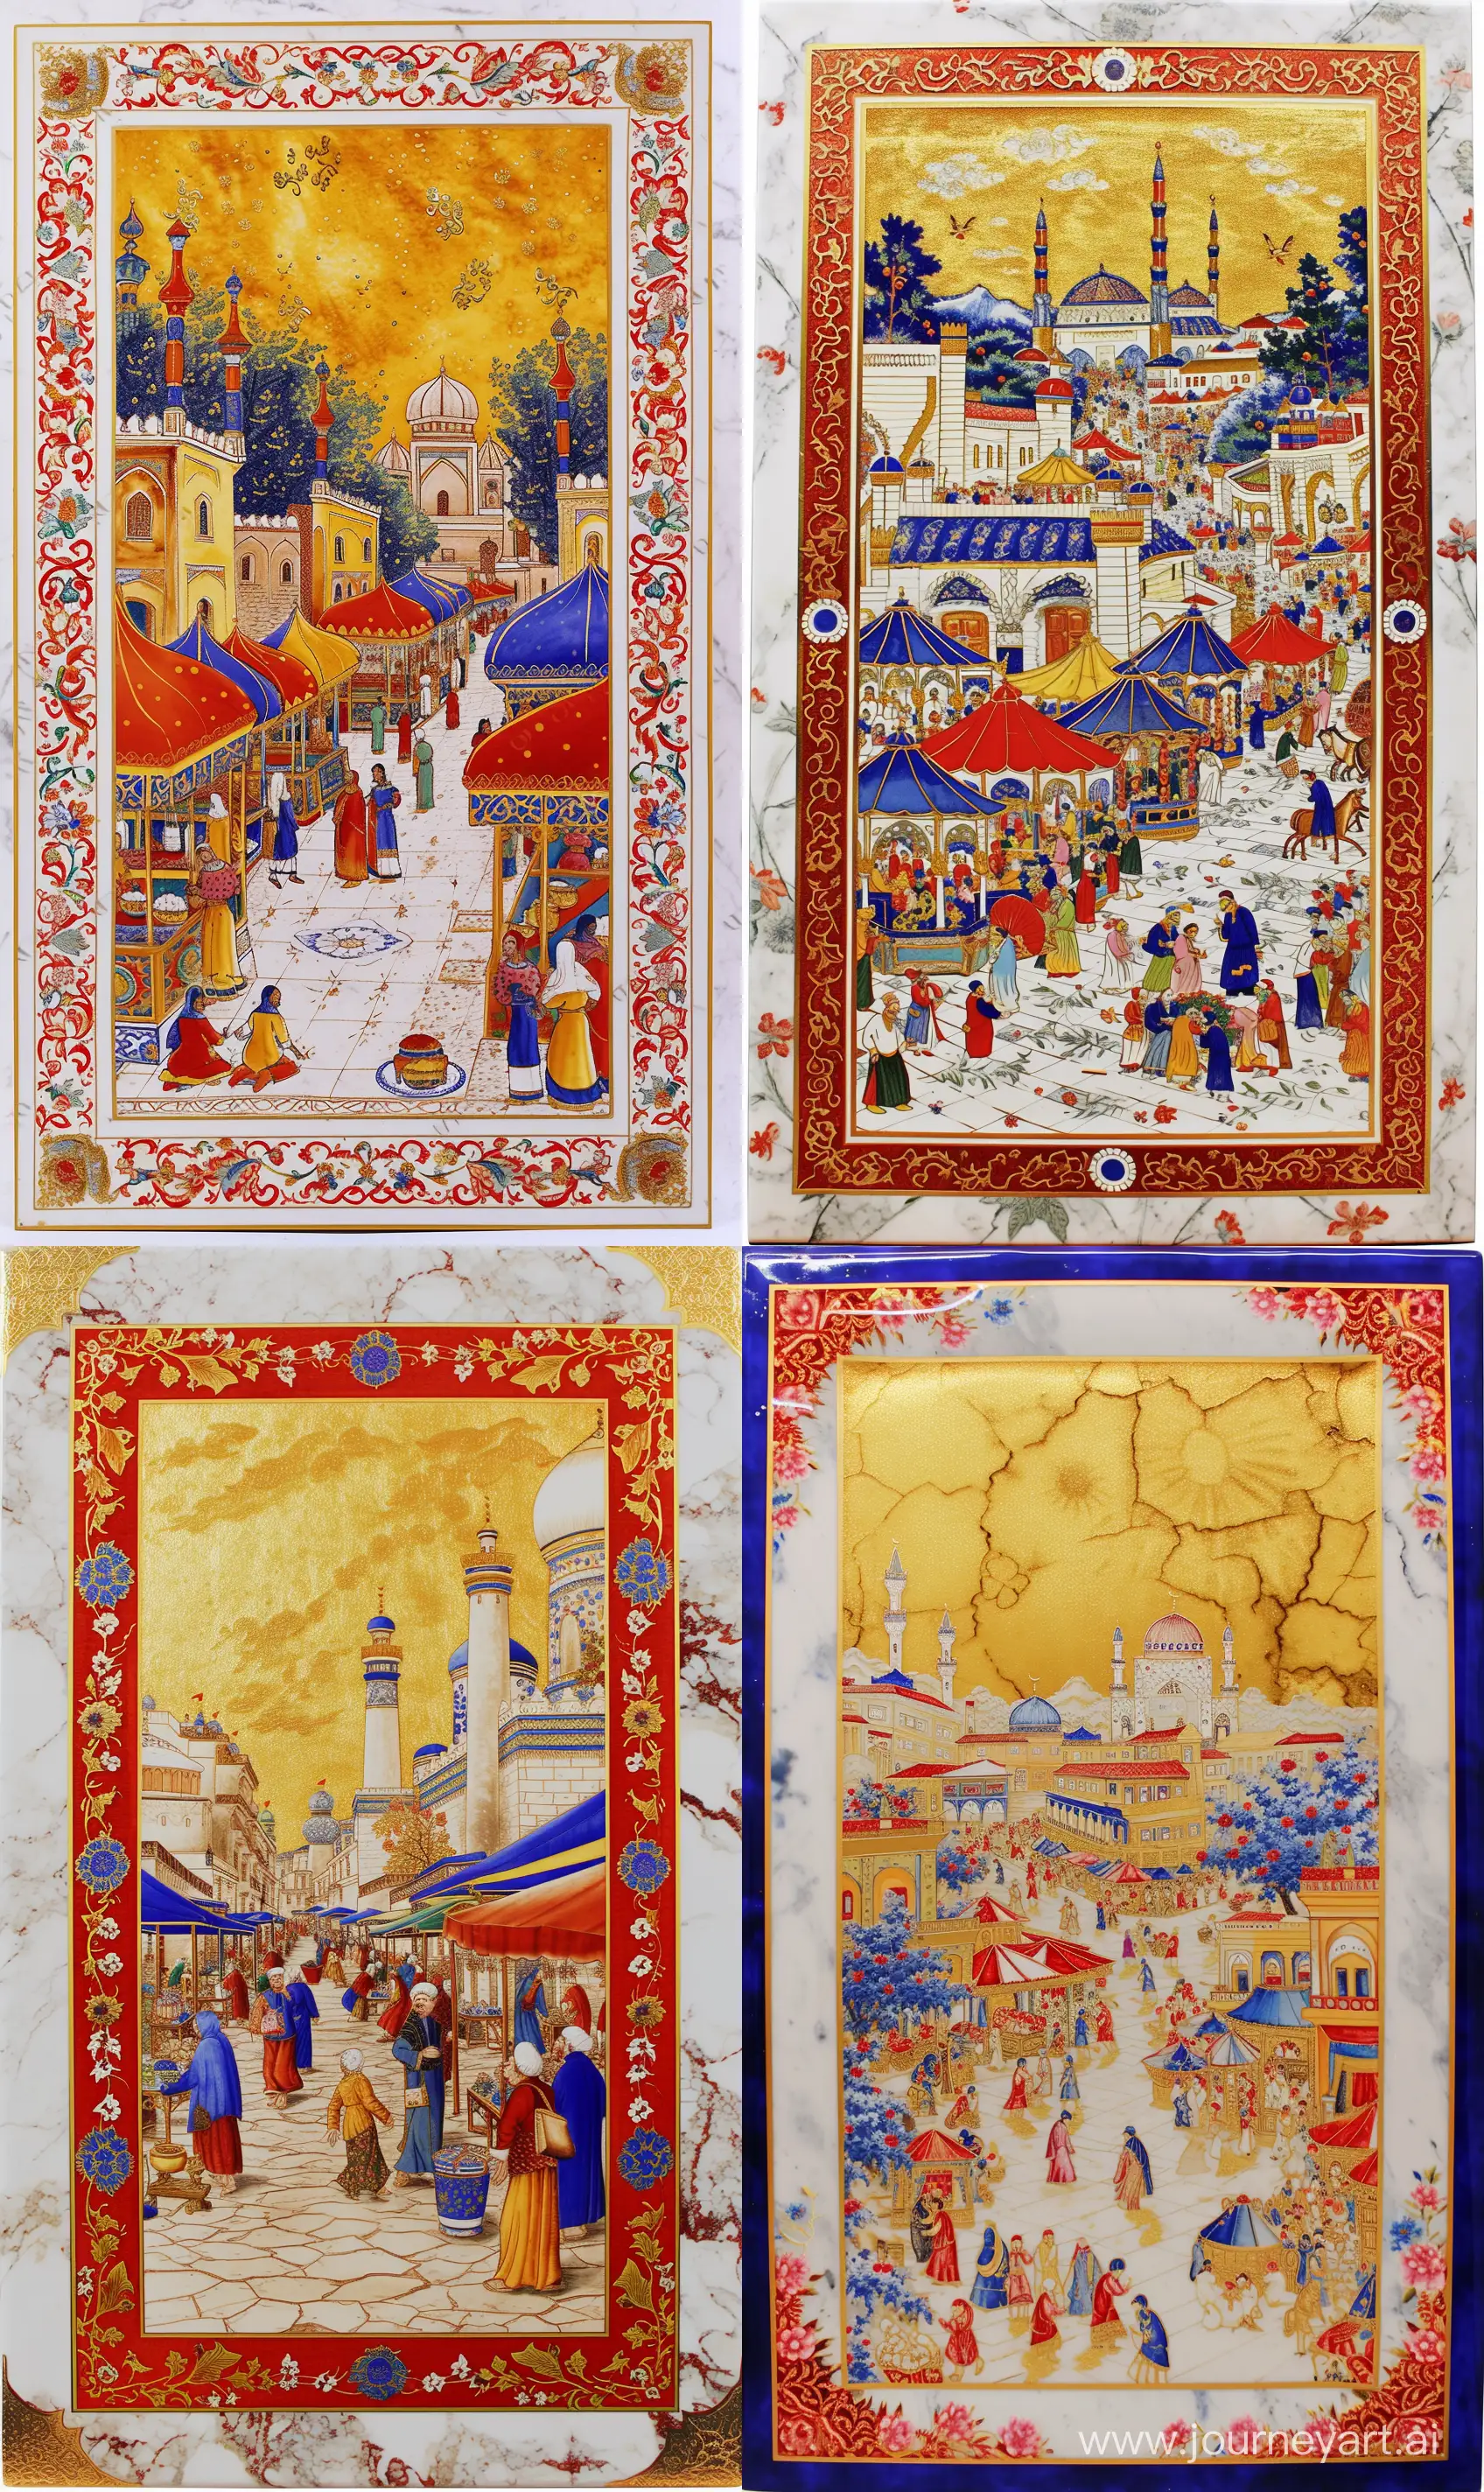 Iznik-Porcelain-Panel-Vibrant-Persian-Marketplace-and-Mosque-Scene-with-3D-Embossed-Floral-Arabesque